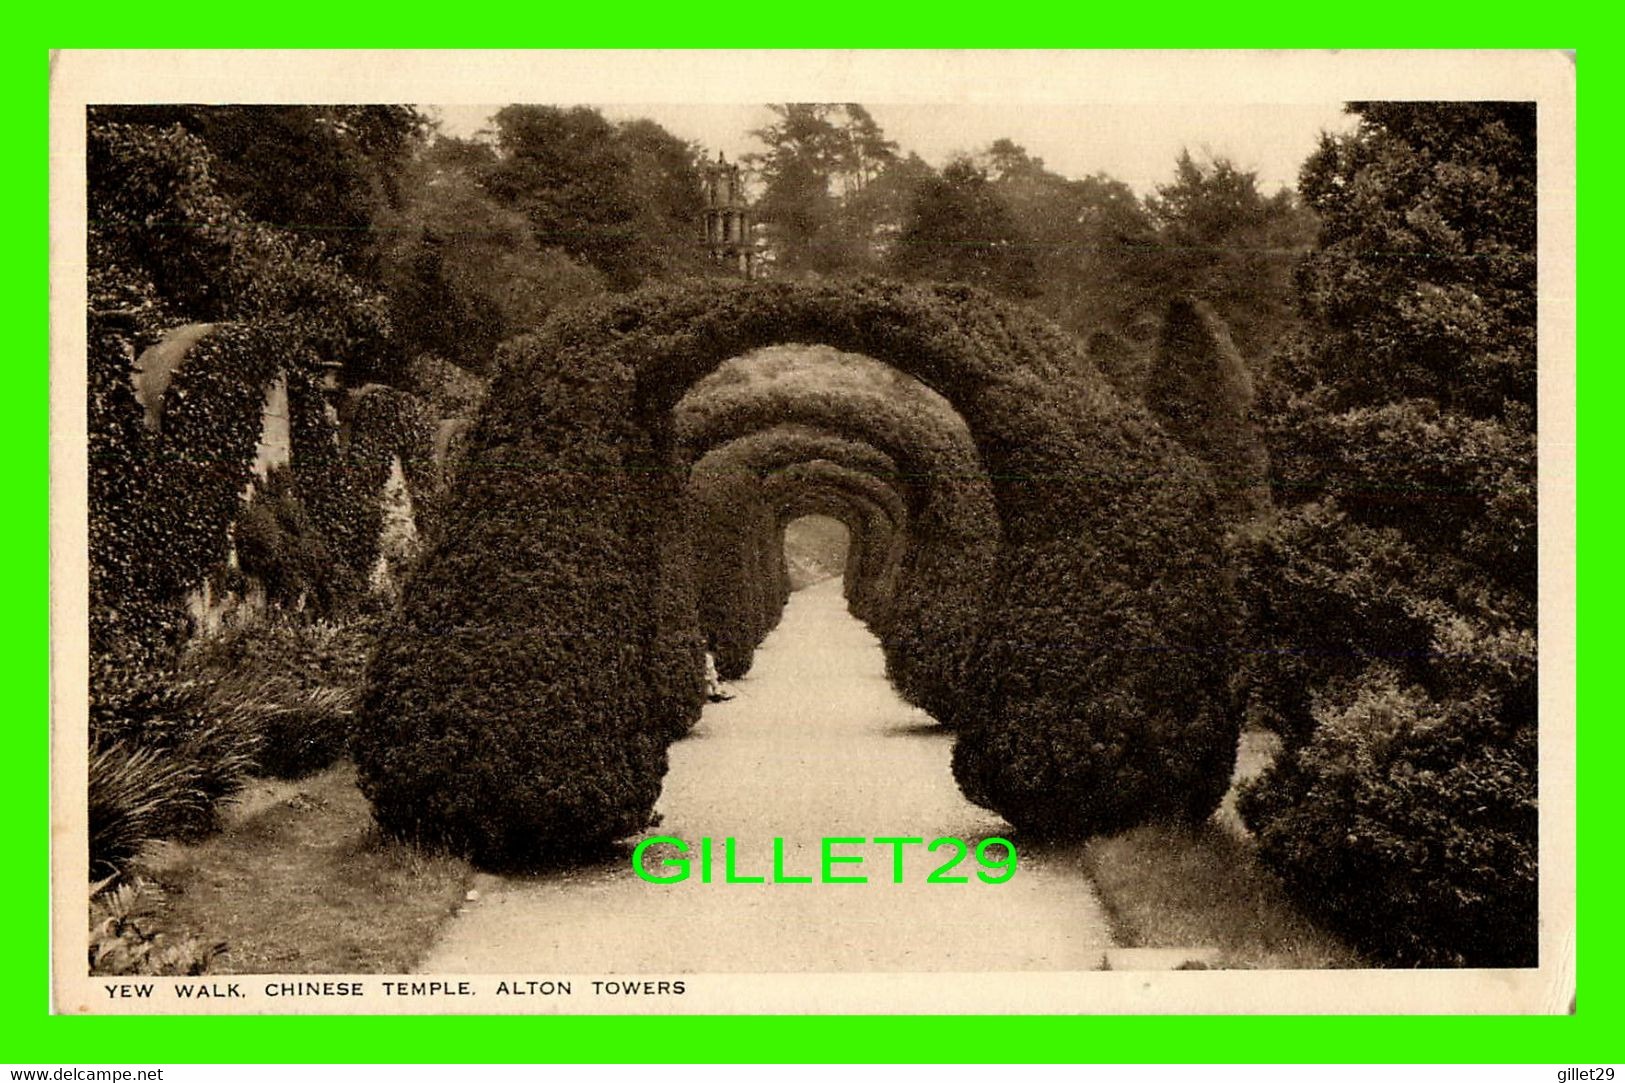 STOKE-ON-TRENT, UK - YEW WALK, CHINESE TEMPLE, ALTON TOWERS - TRAVEL IN 1927 - PUB BY ALTON TOWER CAFE - - Stoke-on-Trent